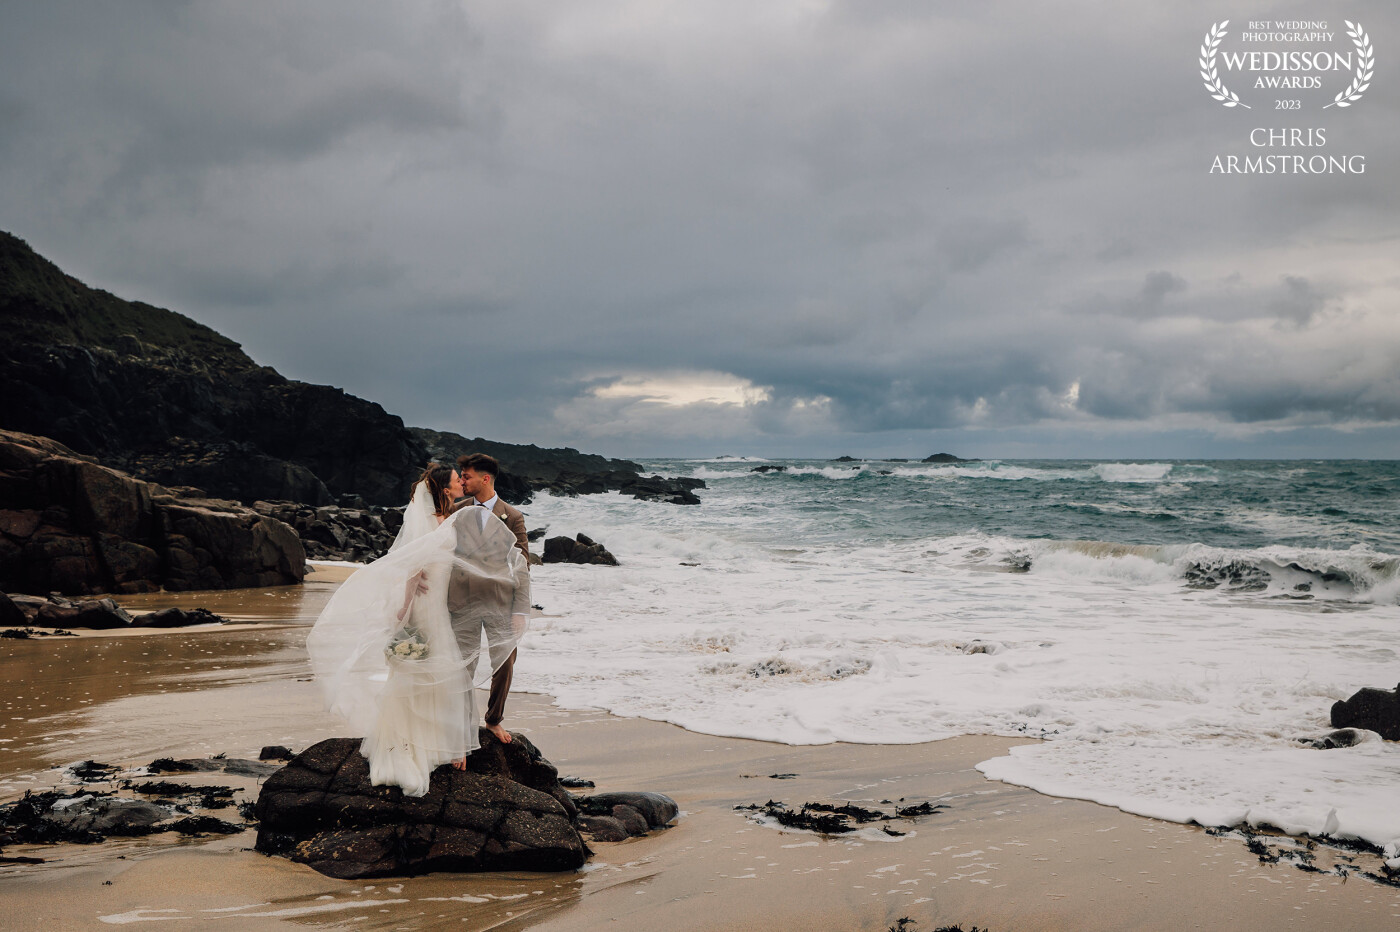 Lauren and Henry, stealing a moment together as we watched a rain storm rolling in across the sea.